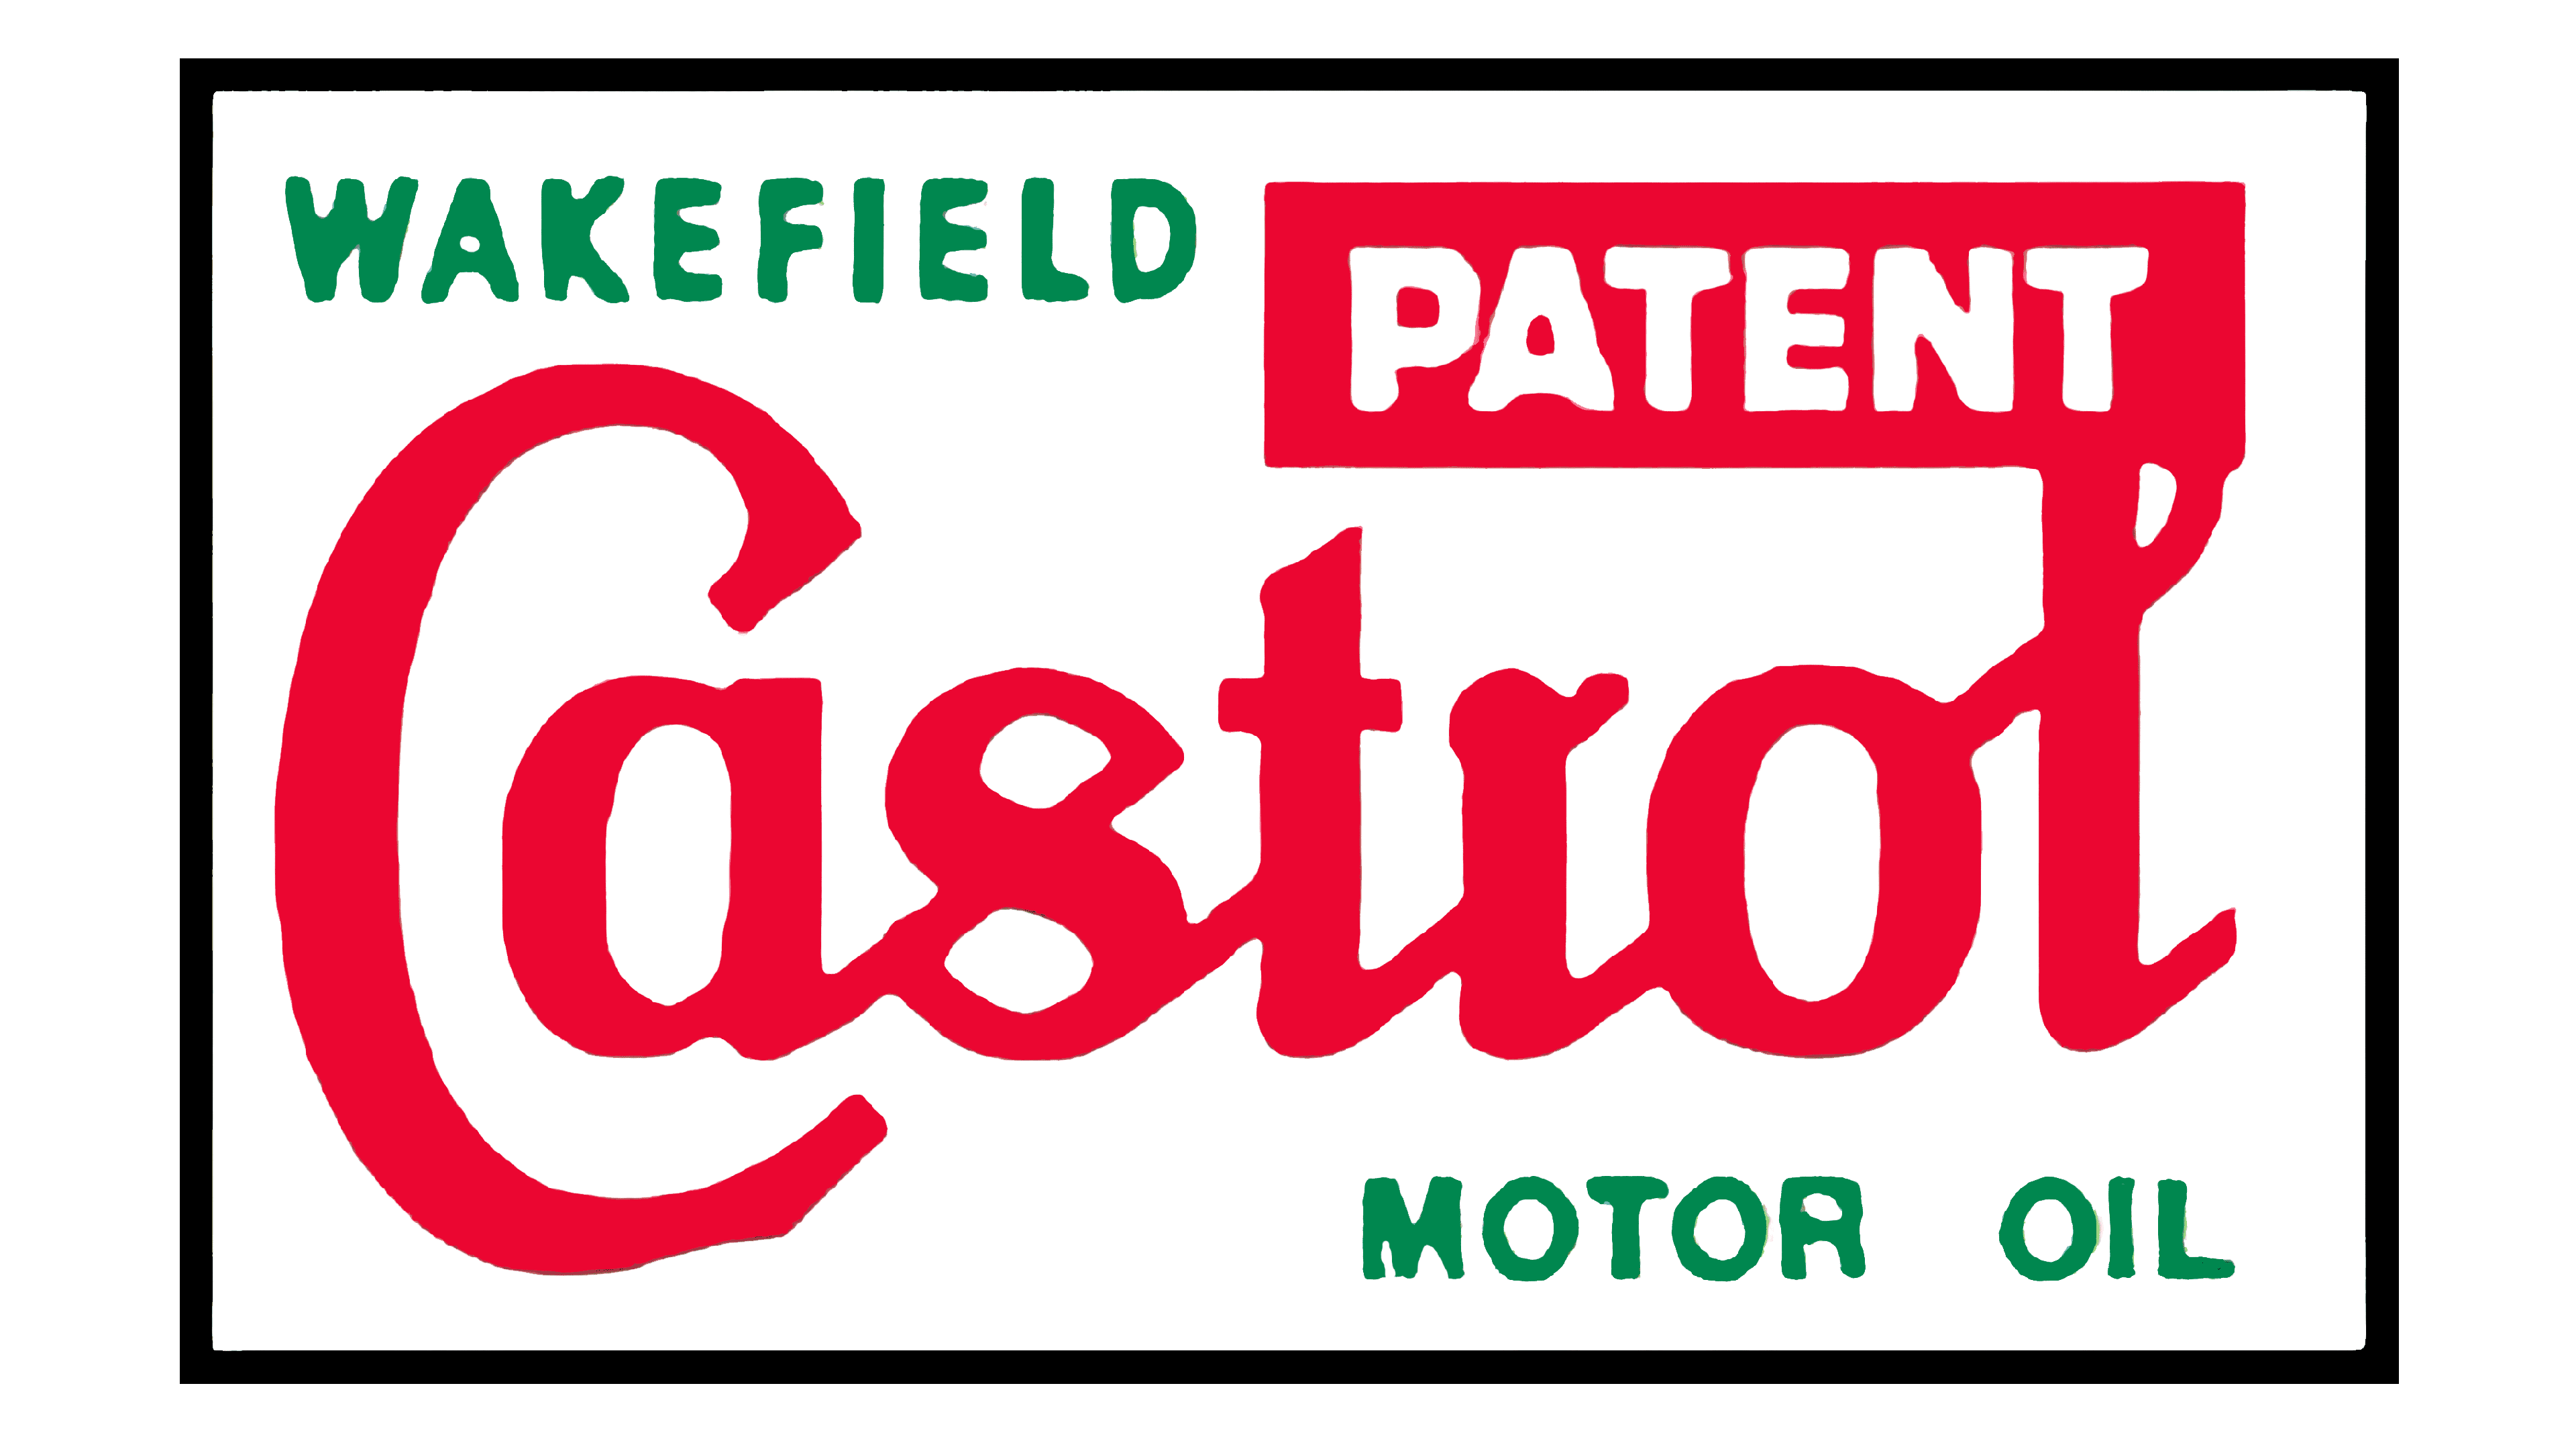 Castrol logo Free Vector Download | FreeImages